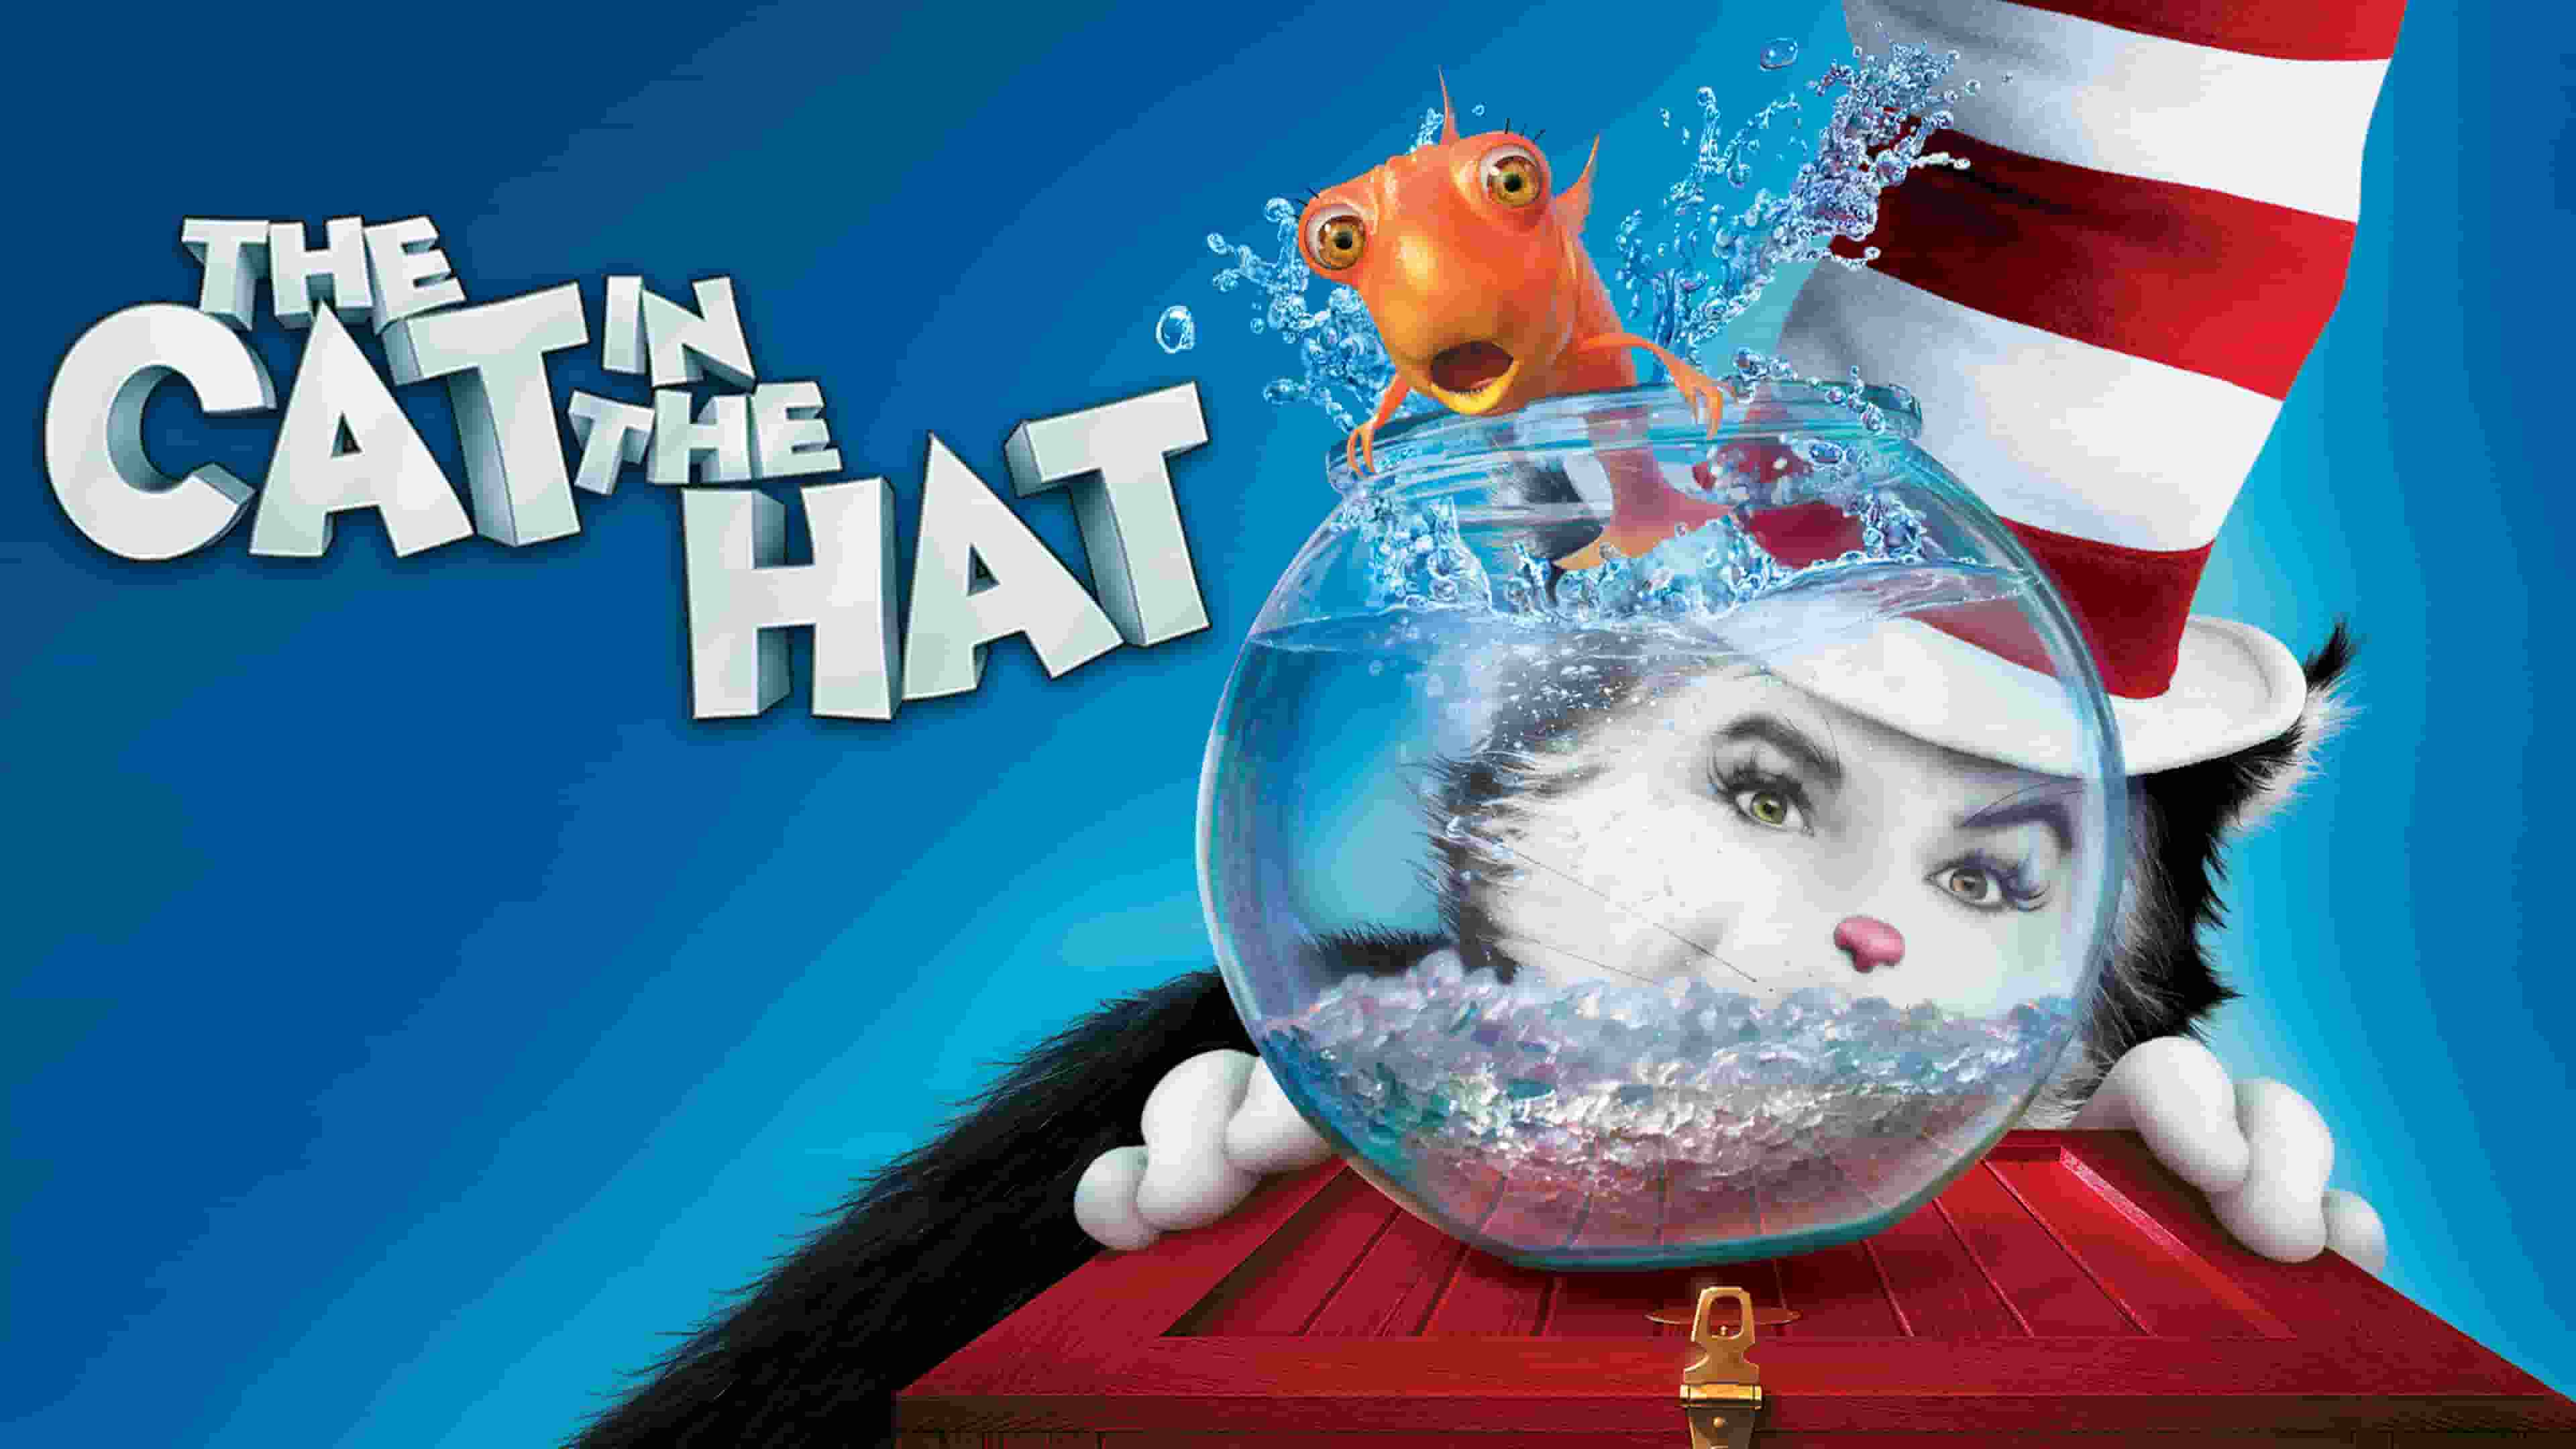 title art for cat in the hat